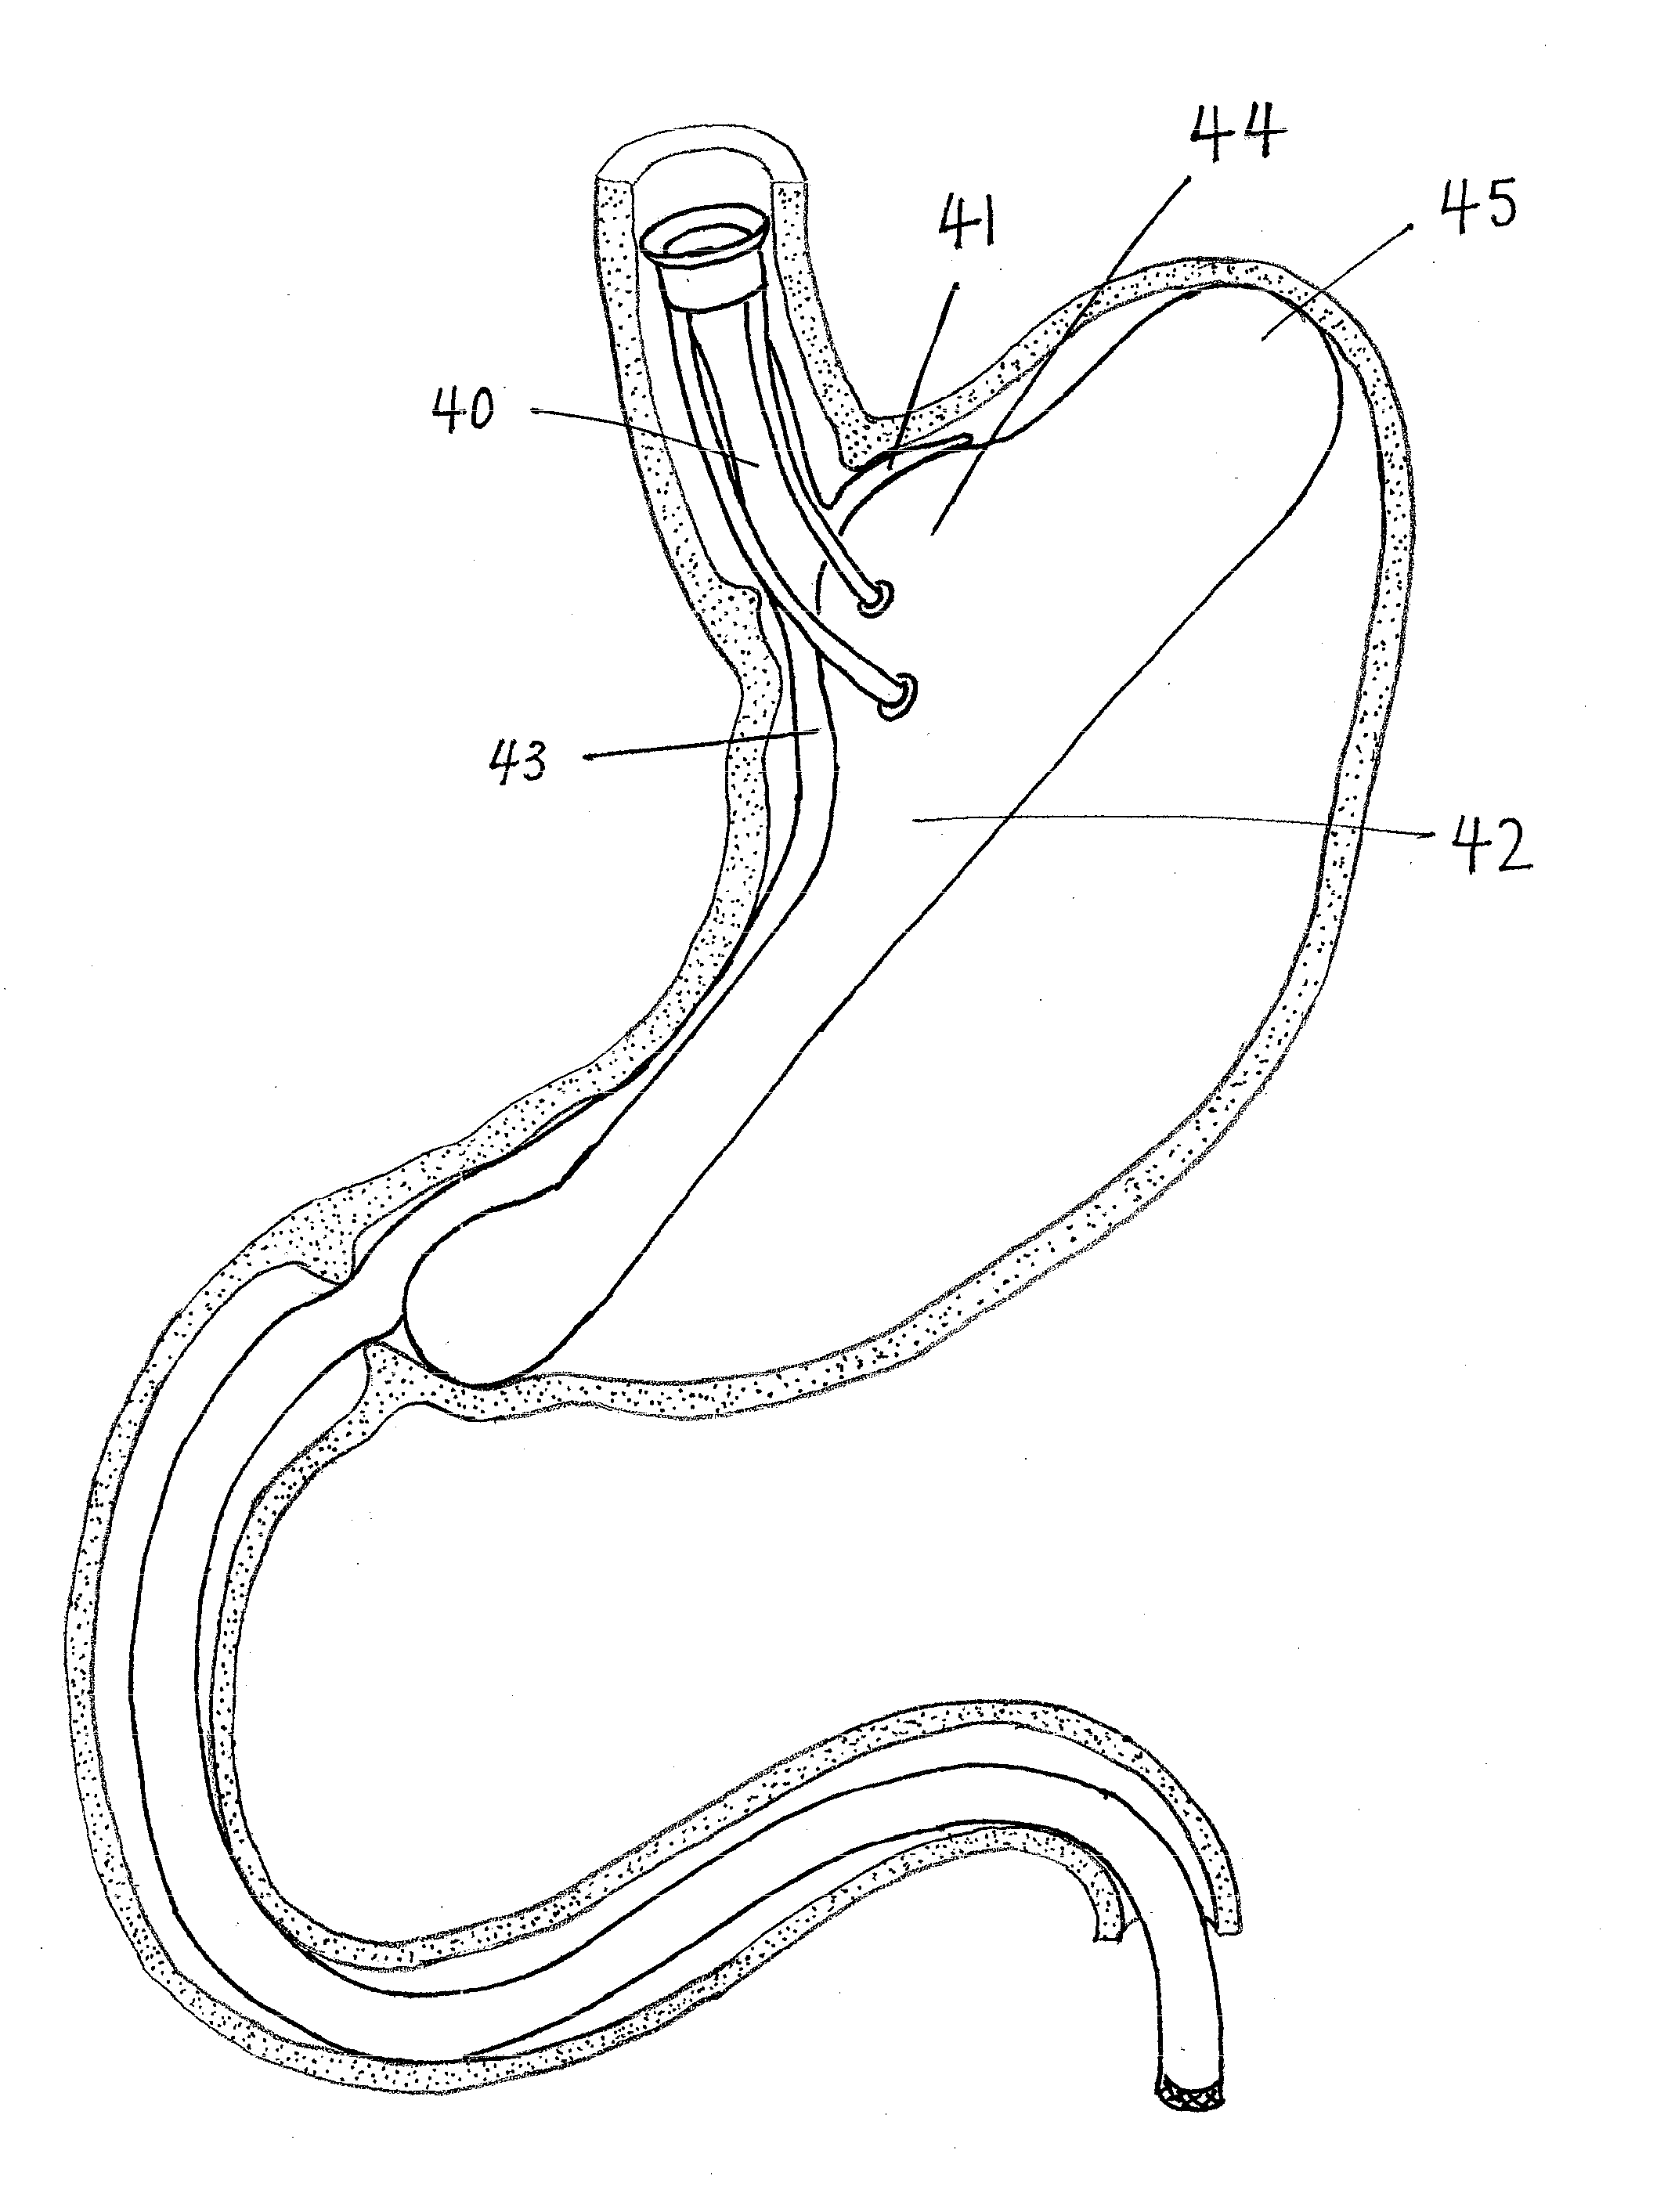 Intragastric Implant Devices